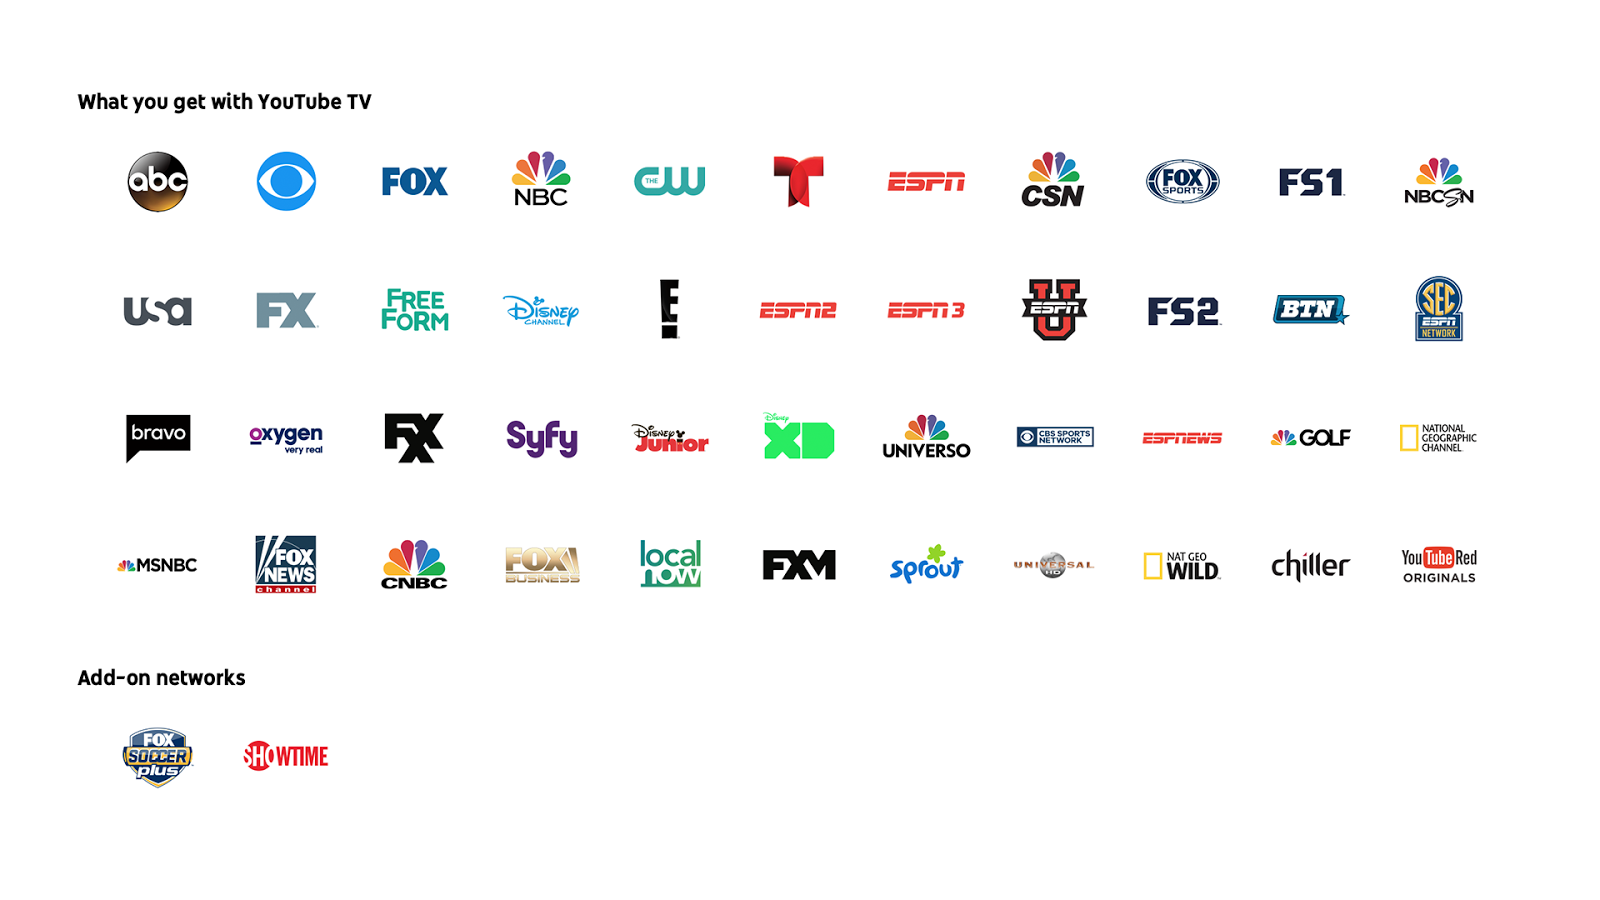 youtube-tv-channels